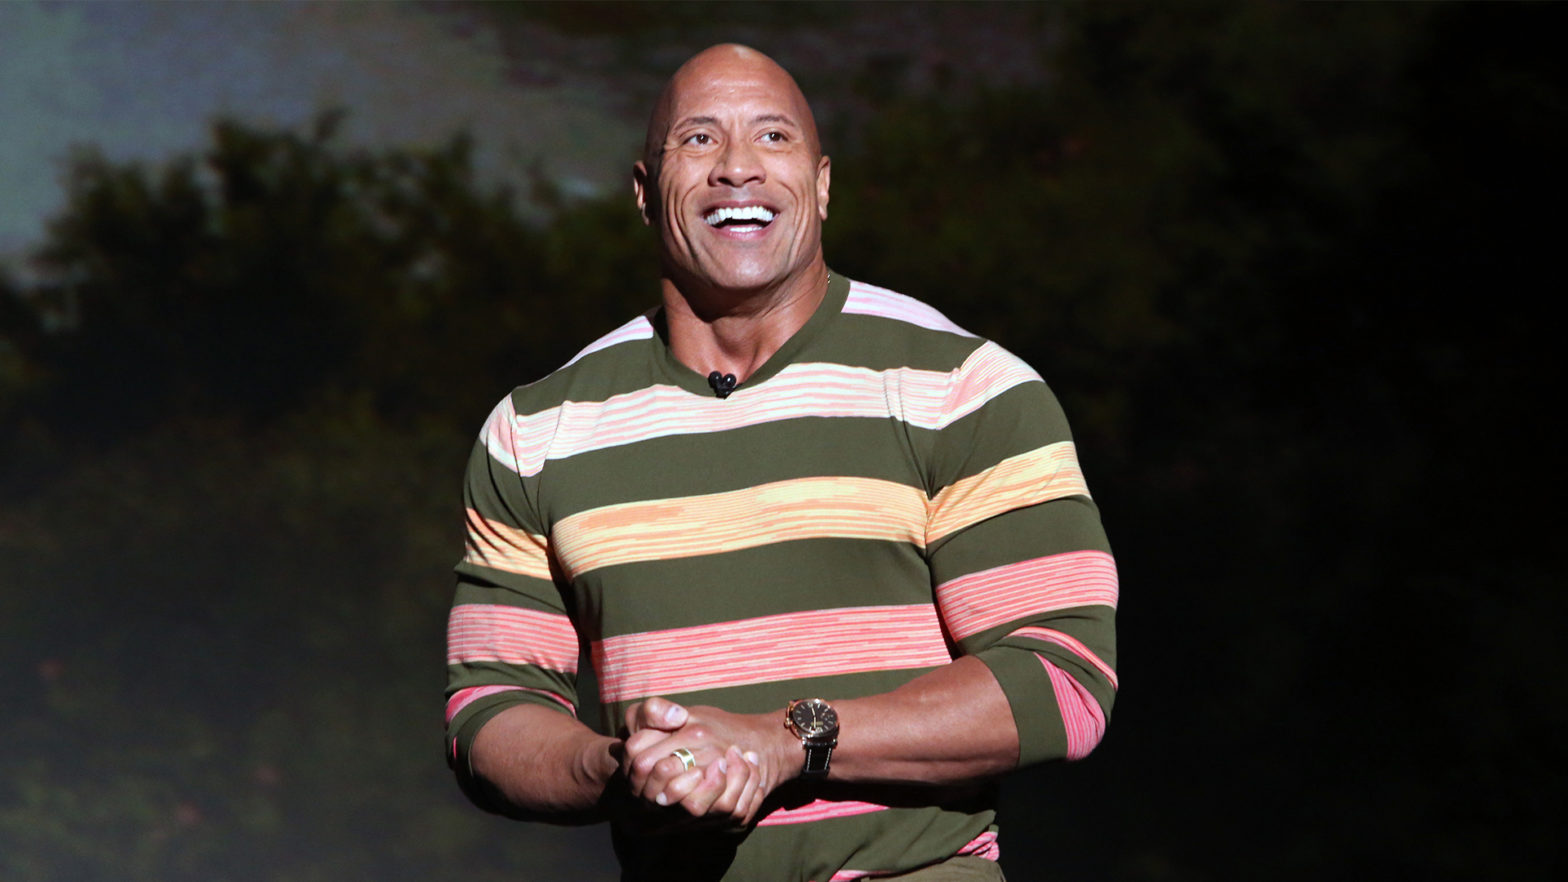 How Dwayne 'The Rock' Johnson Went From Having $7 To His Name To Earning An Estimated $800M Net Worth